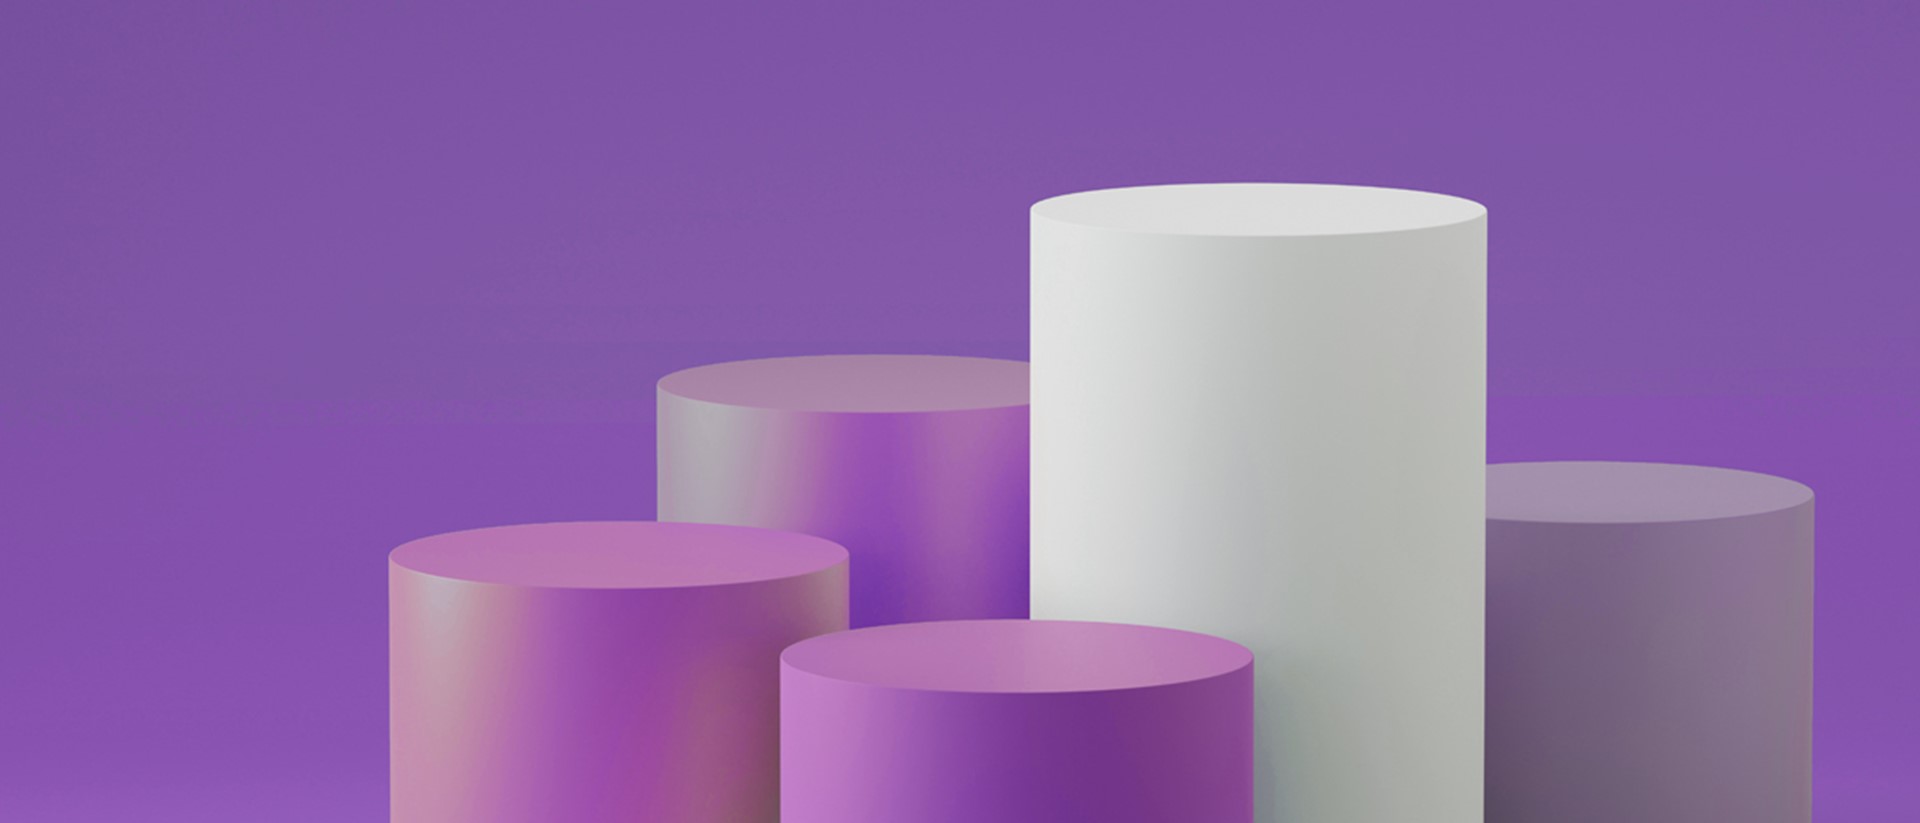 Image of cylinders on a purple background